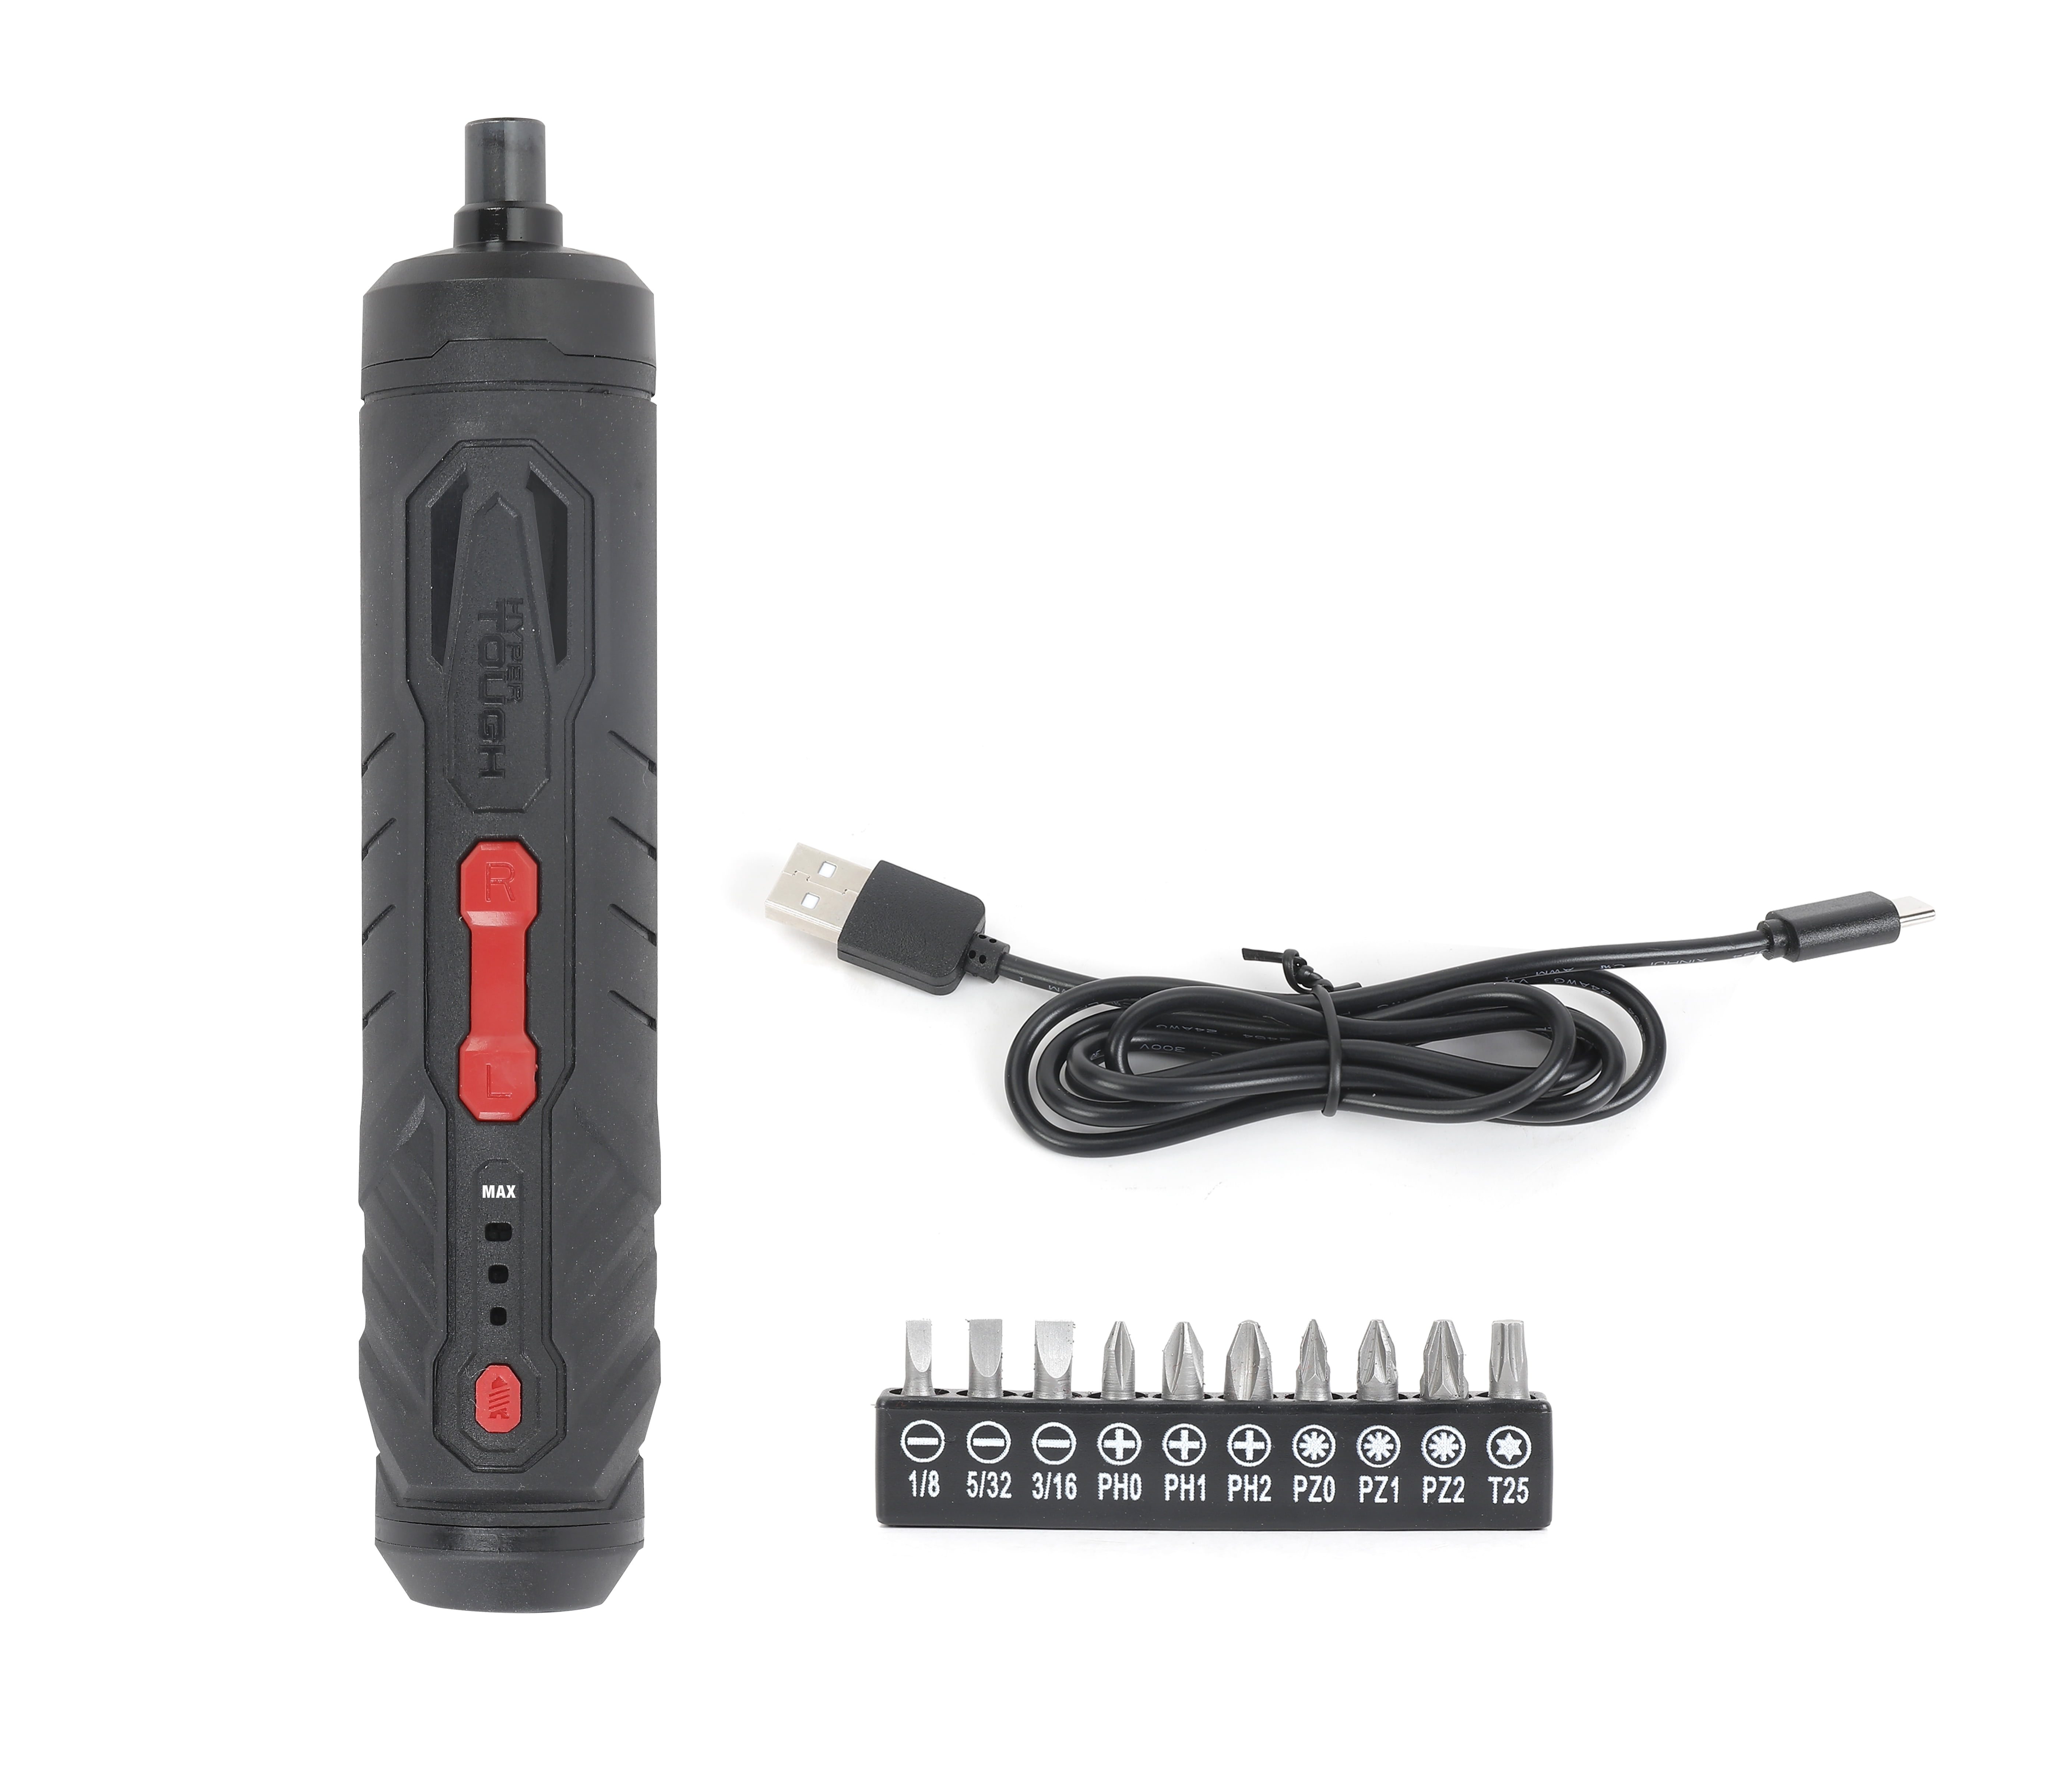 Hyper Tough 4-Volt Max* Lithium-Ion Straight-Grip Cordless Screwdriver with Charger, Model 98934